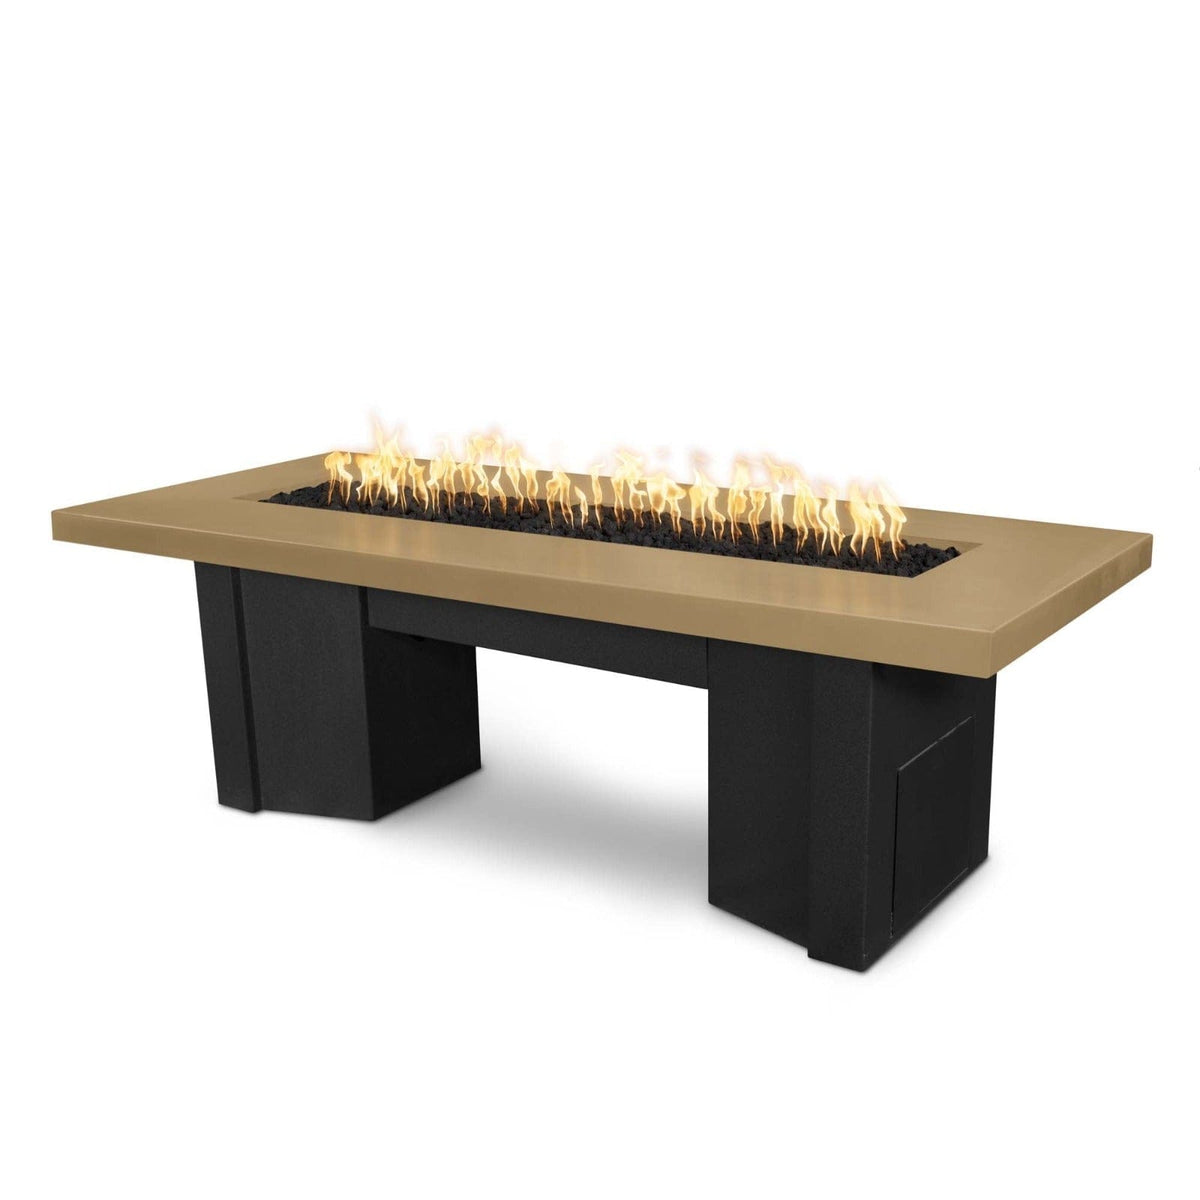 The Outdoor Plus Fire Features Brown (-BRN) / Black Powder Coated Steel (-BLK) The Outdoor Plus 78&quot; Alameda Fire Table Smooth Concrete in Natural Gas - Flame Sense System with Push Button Spark Igniter / OPT-ALMGFRC78FSEN-NG